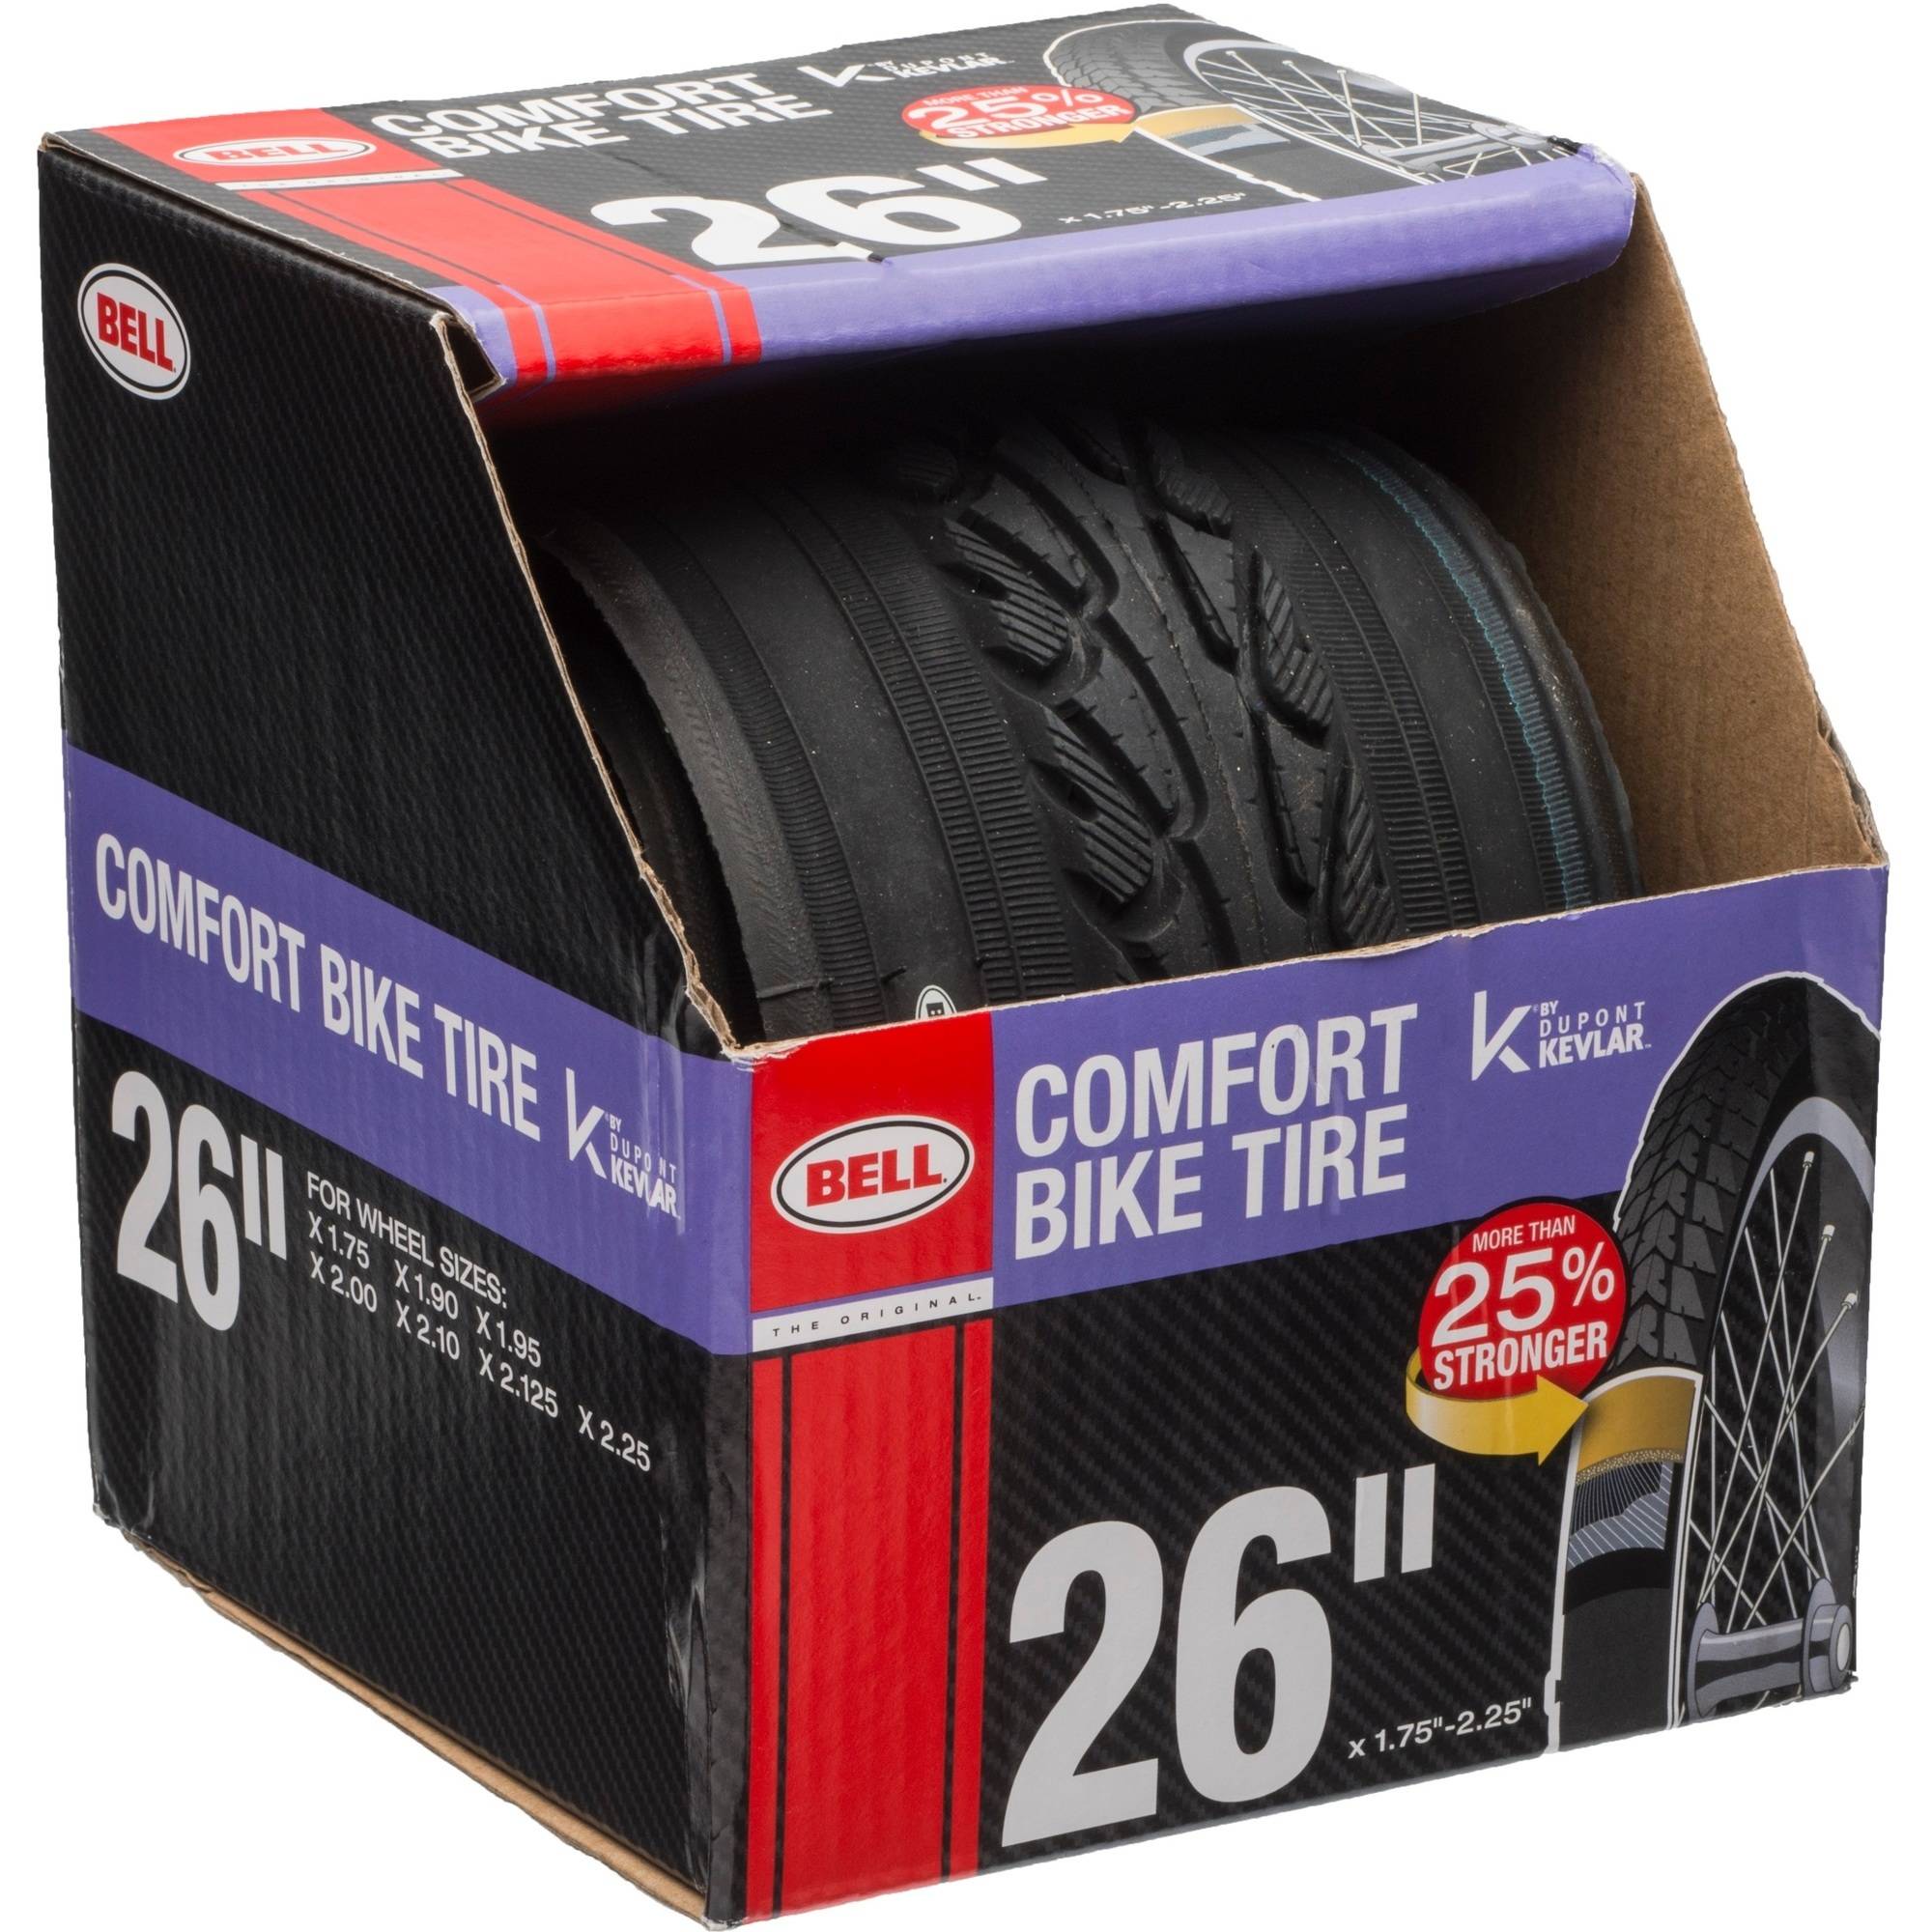 Bell Sports Comfort Glide Road Bike Tire with Kevlar, 26" x 1.75", Black - image 1 of 5